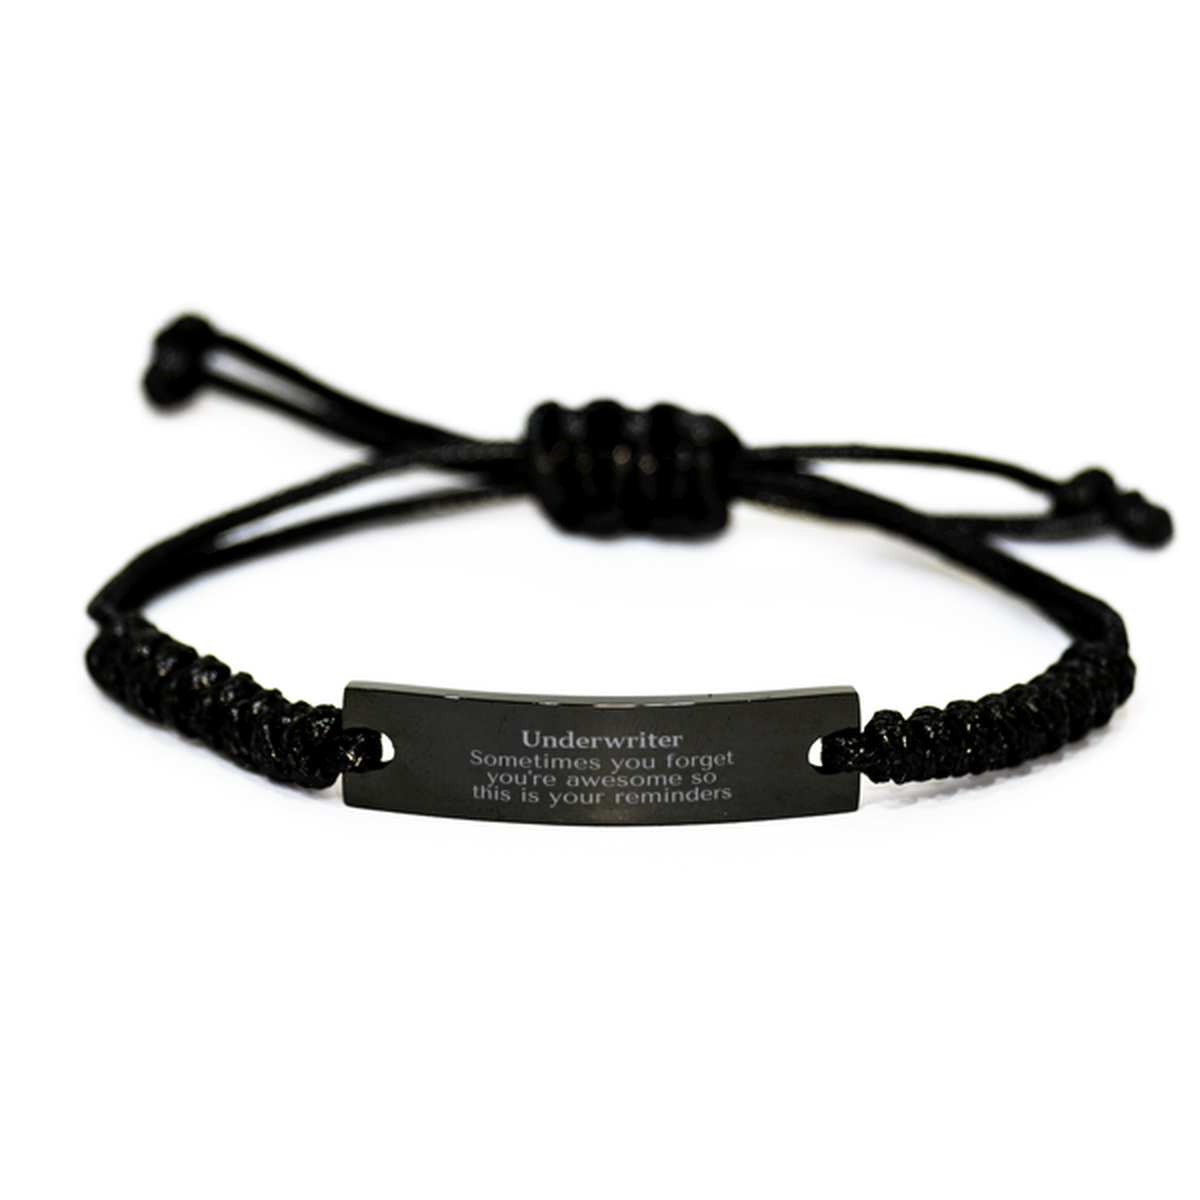 Sentimental Underwriter Black Rope Bracelet, Underwriter Sometimes you forget you're awesome so this is your reminders, Graduation Christmas Birthday Gifts for Underwriter, Men, Women, Coworkers